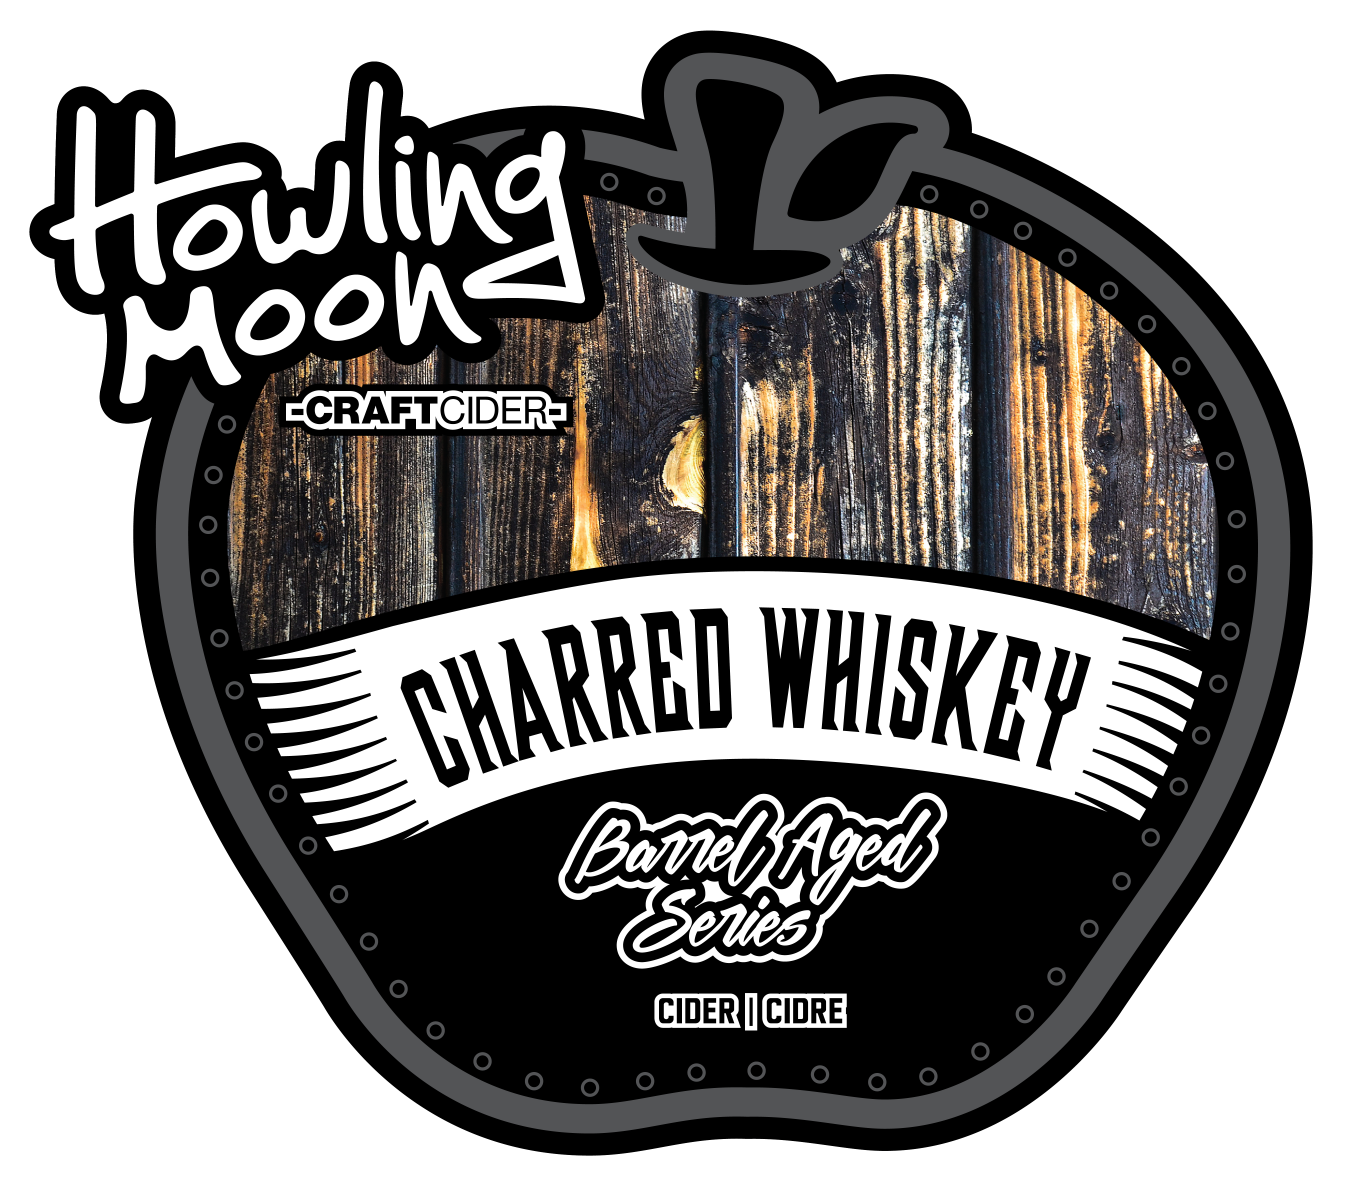 Charred Whiskey Barrel Aged Howling Moon Craft Cider, made from heritage apples in Oliver BC